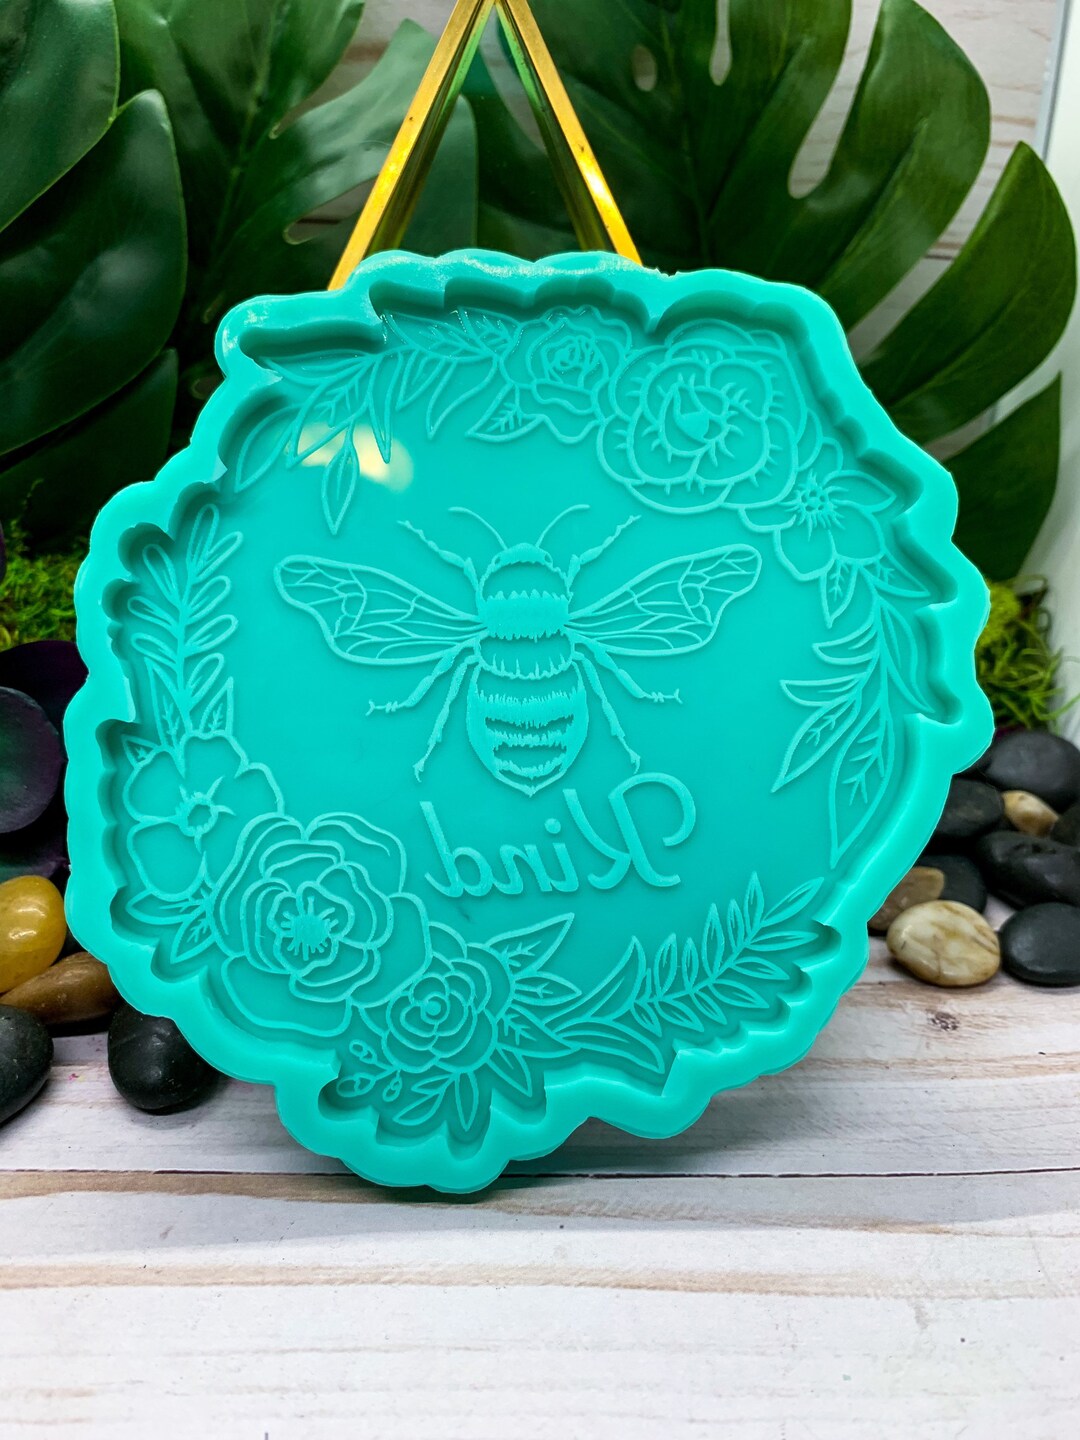 Bee and Honeycomb Silicone Molds Set, 7 cavity Bee Mold, Honeycomb Mat